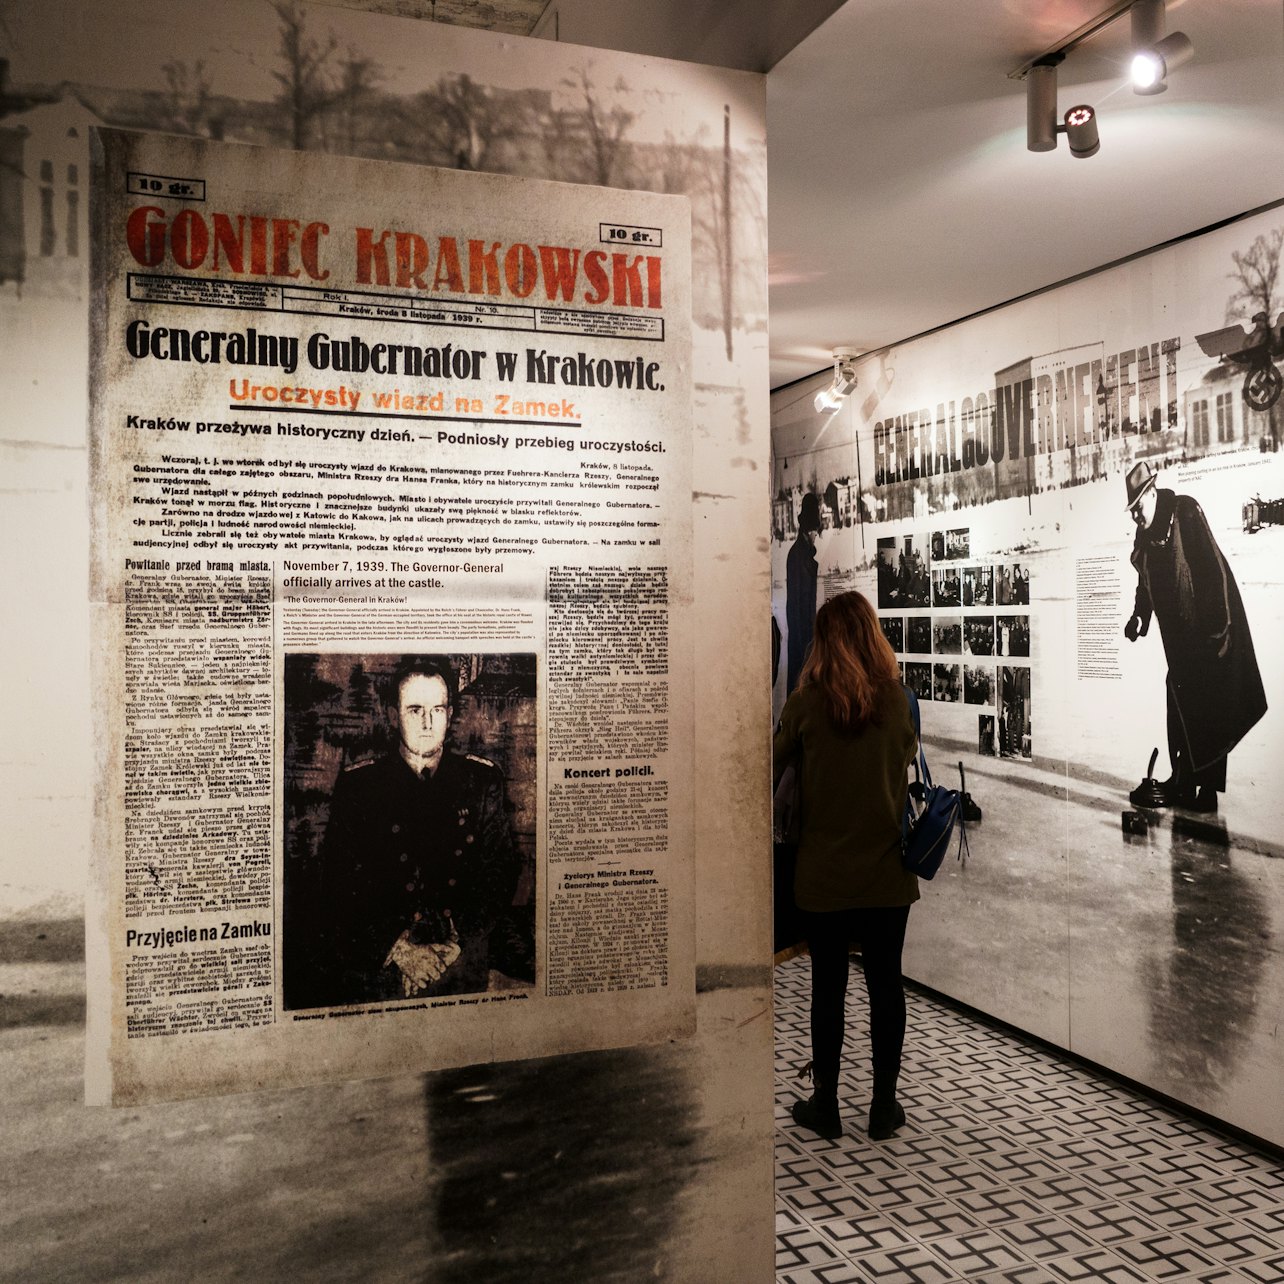 Schindler’s Factory Museum: Skip The Line + Guided Tour - Accommodations in Krakow